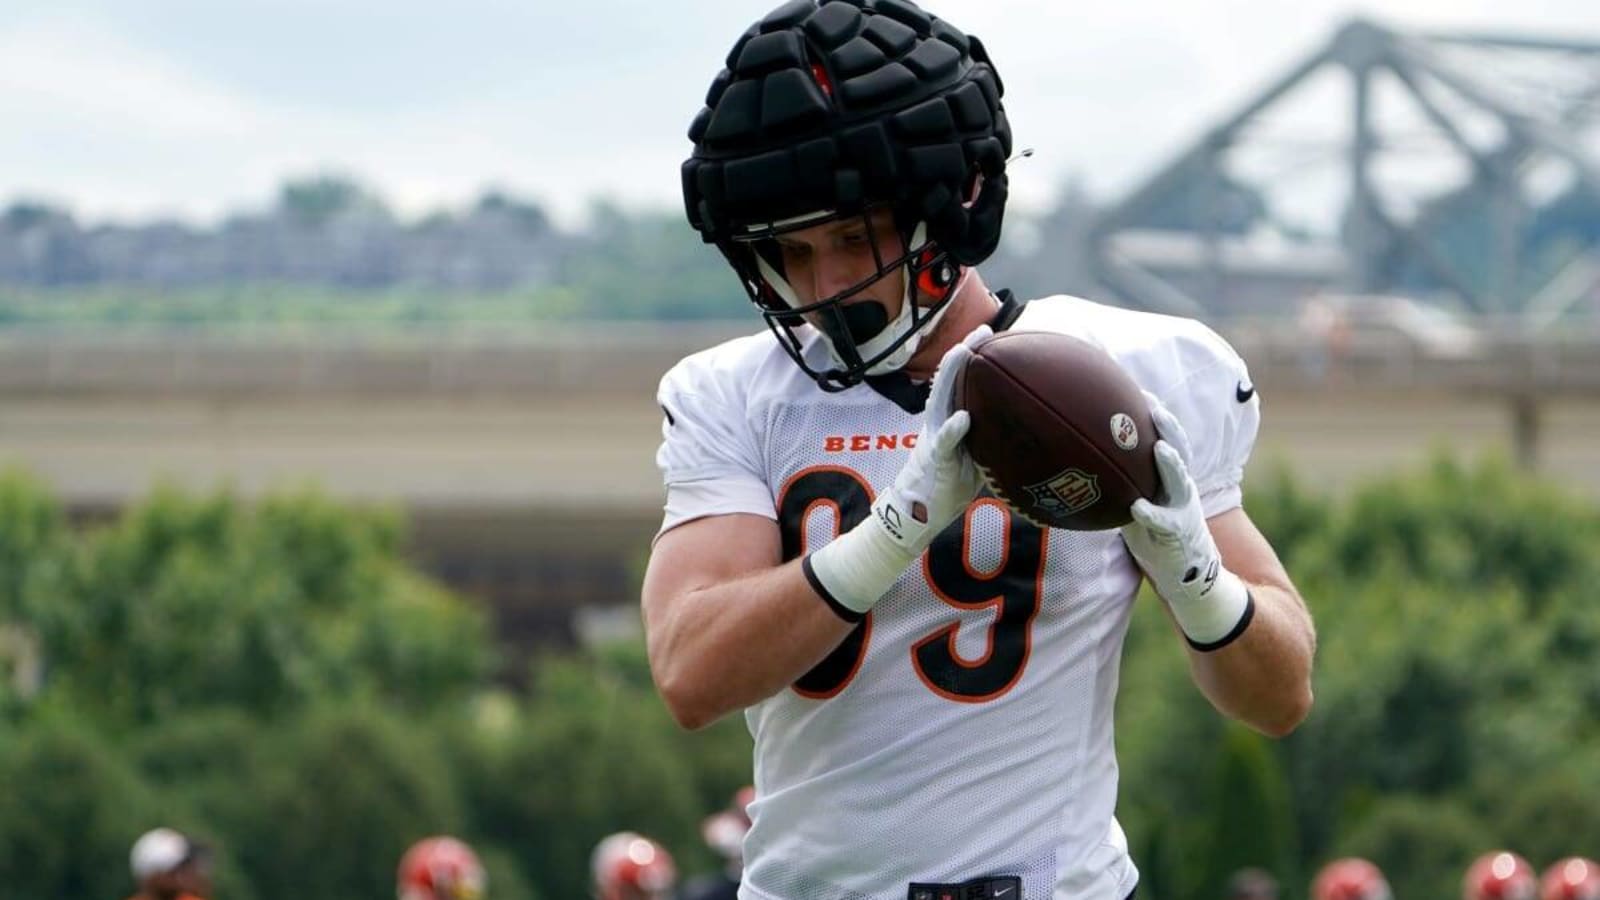 Bengals Place Tight End Drew Sample on Injured Reserve